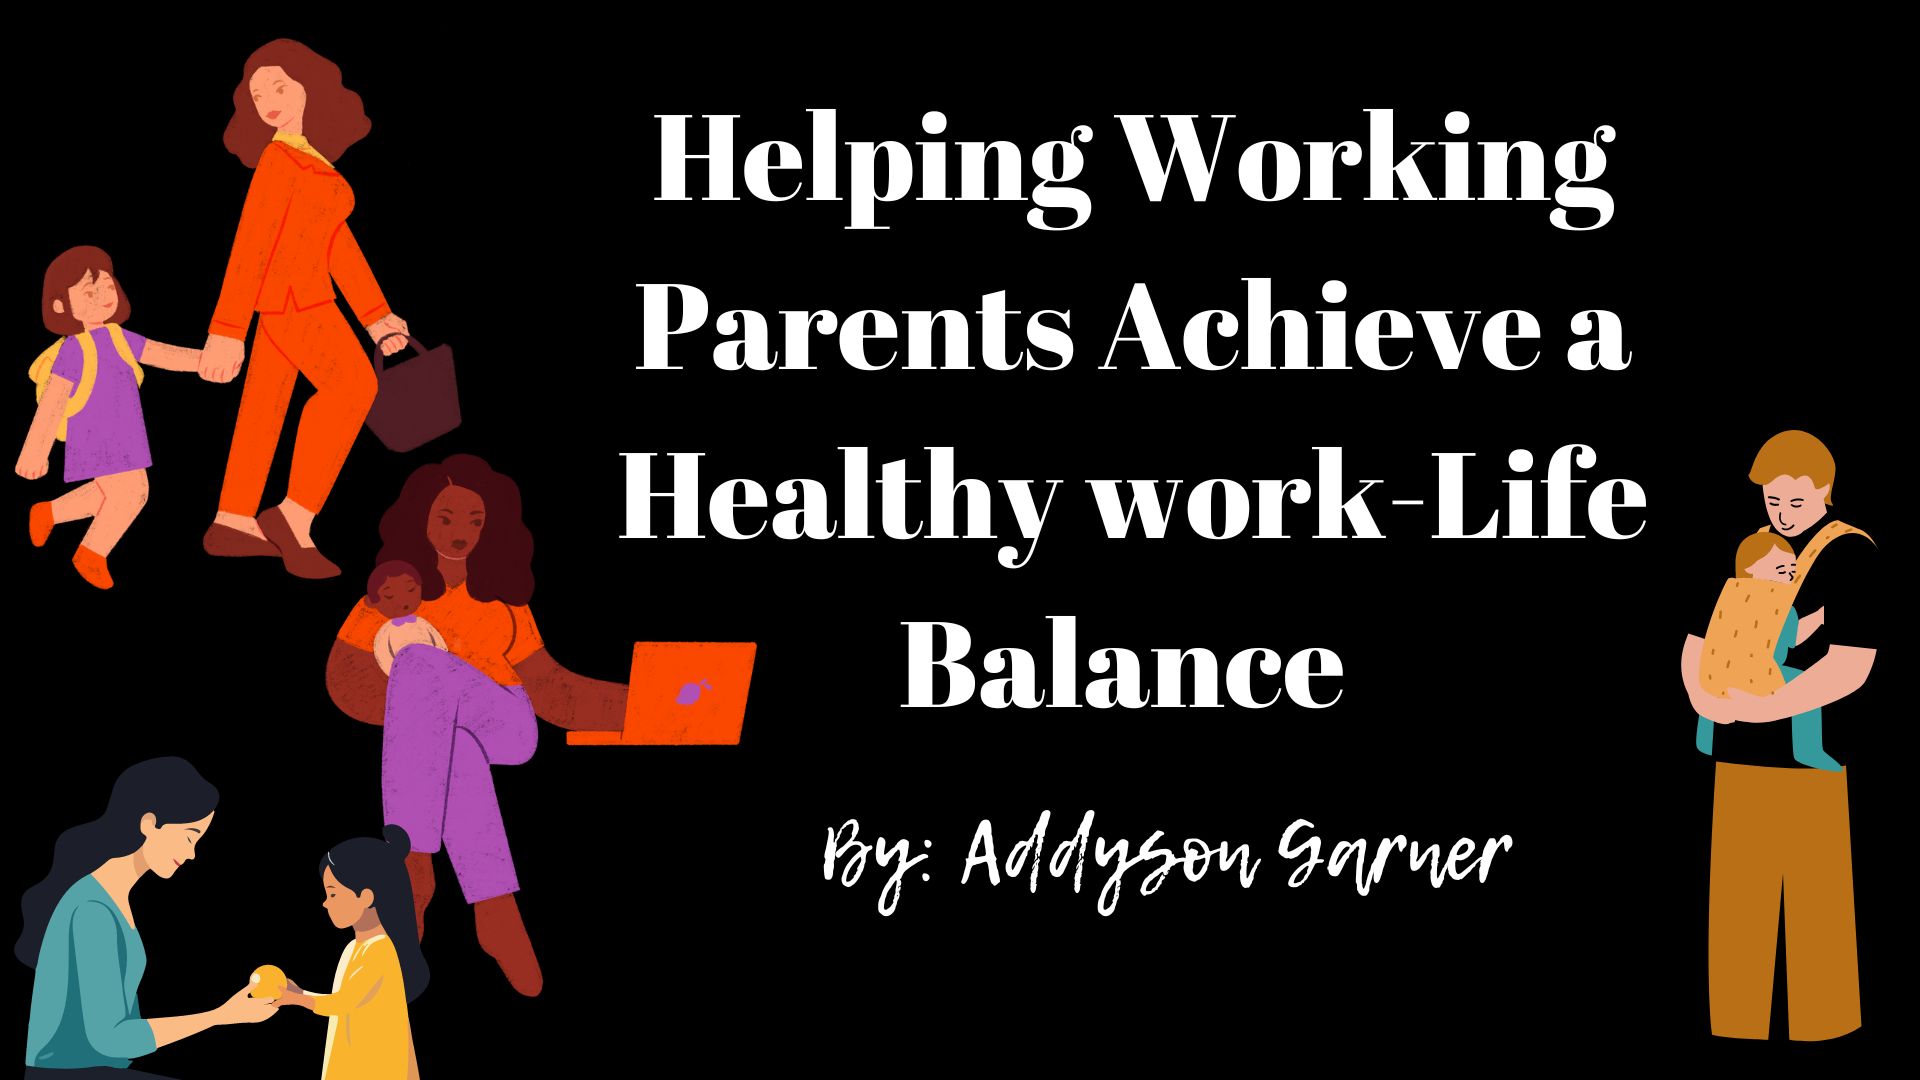 Helping Working Parents Achieve a Healthy Work-Life Balance